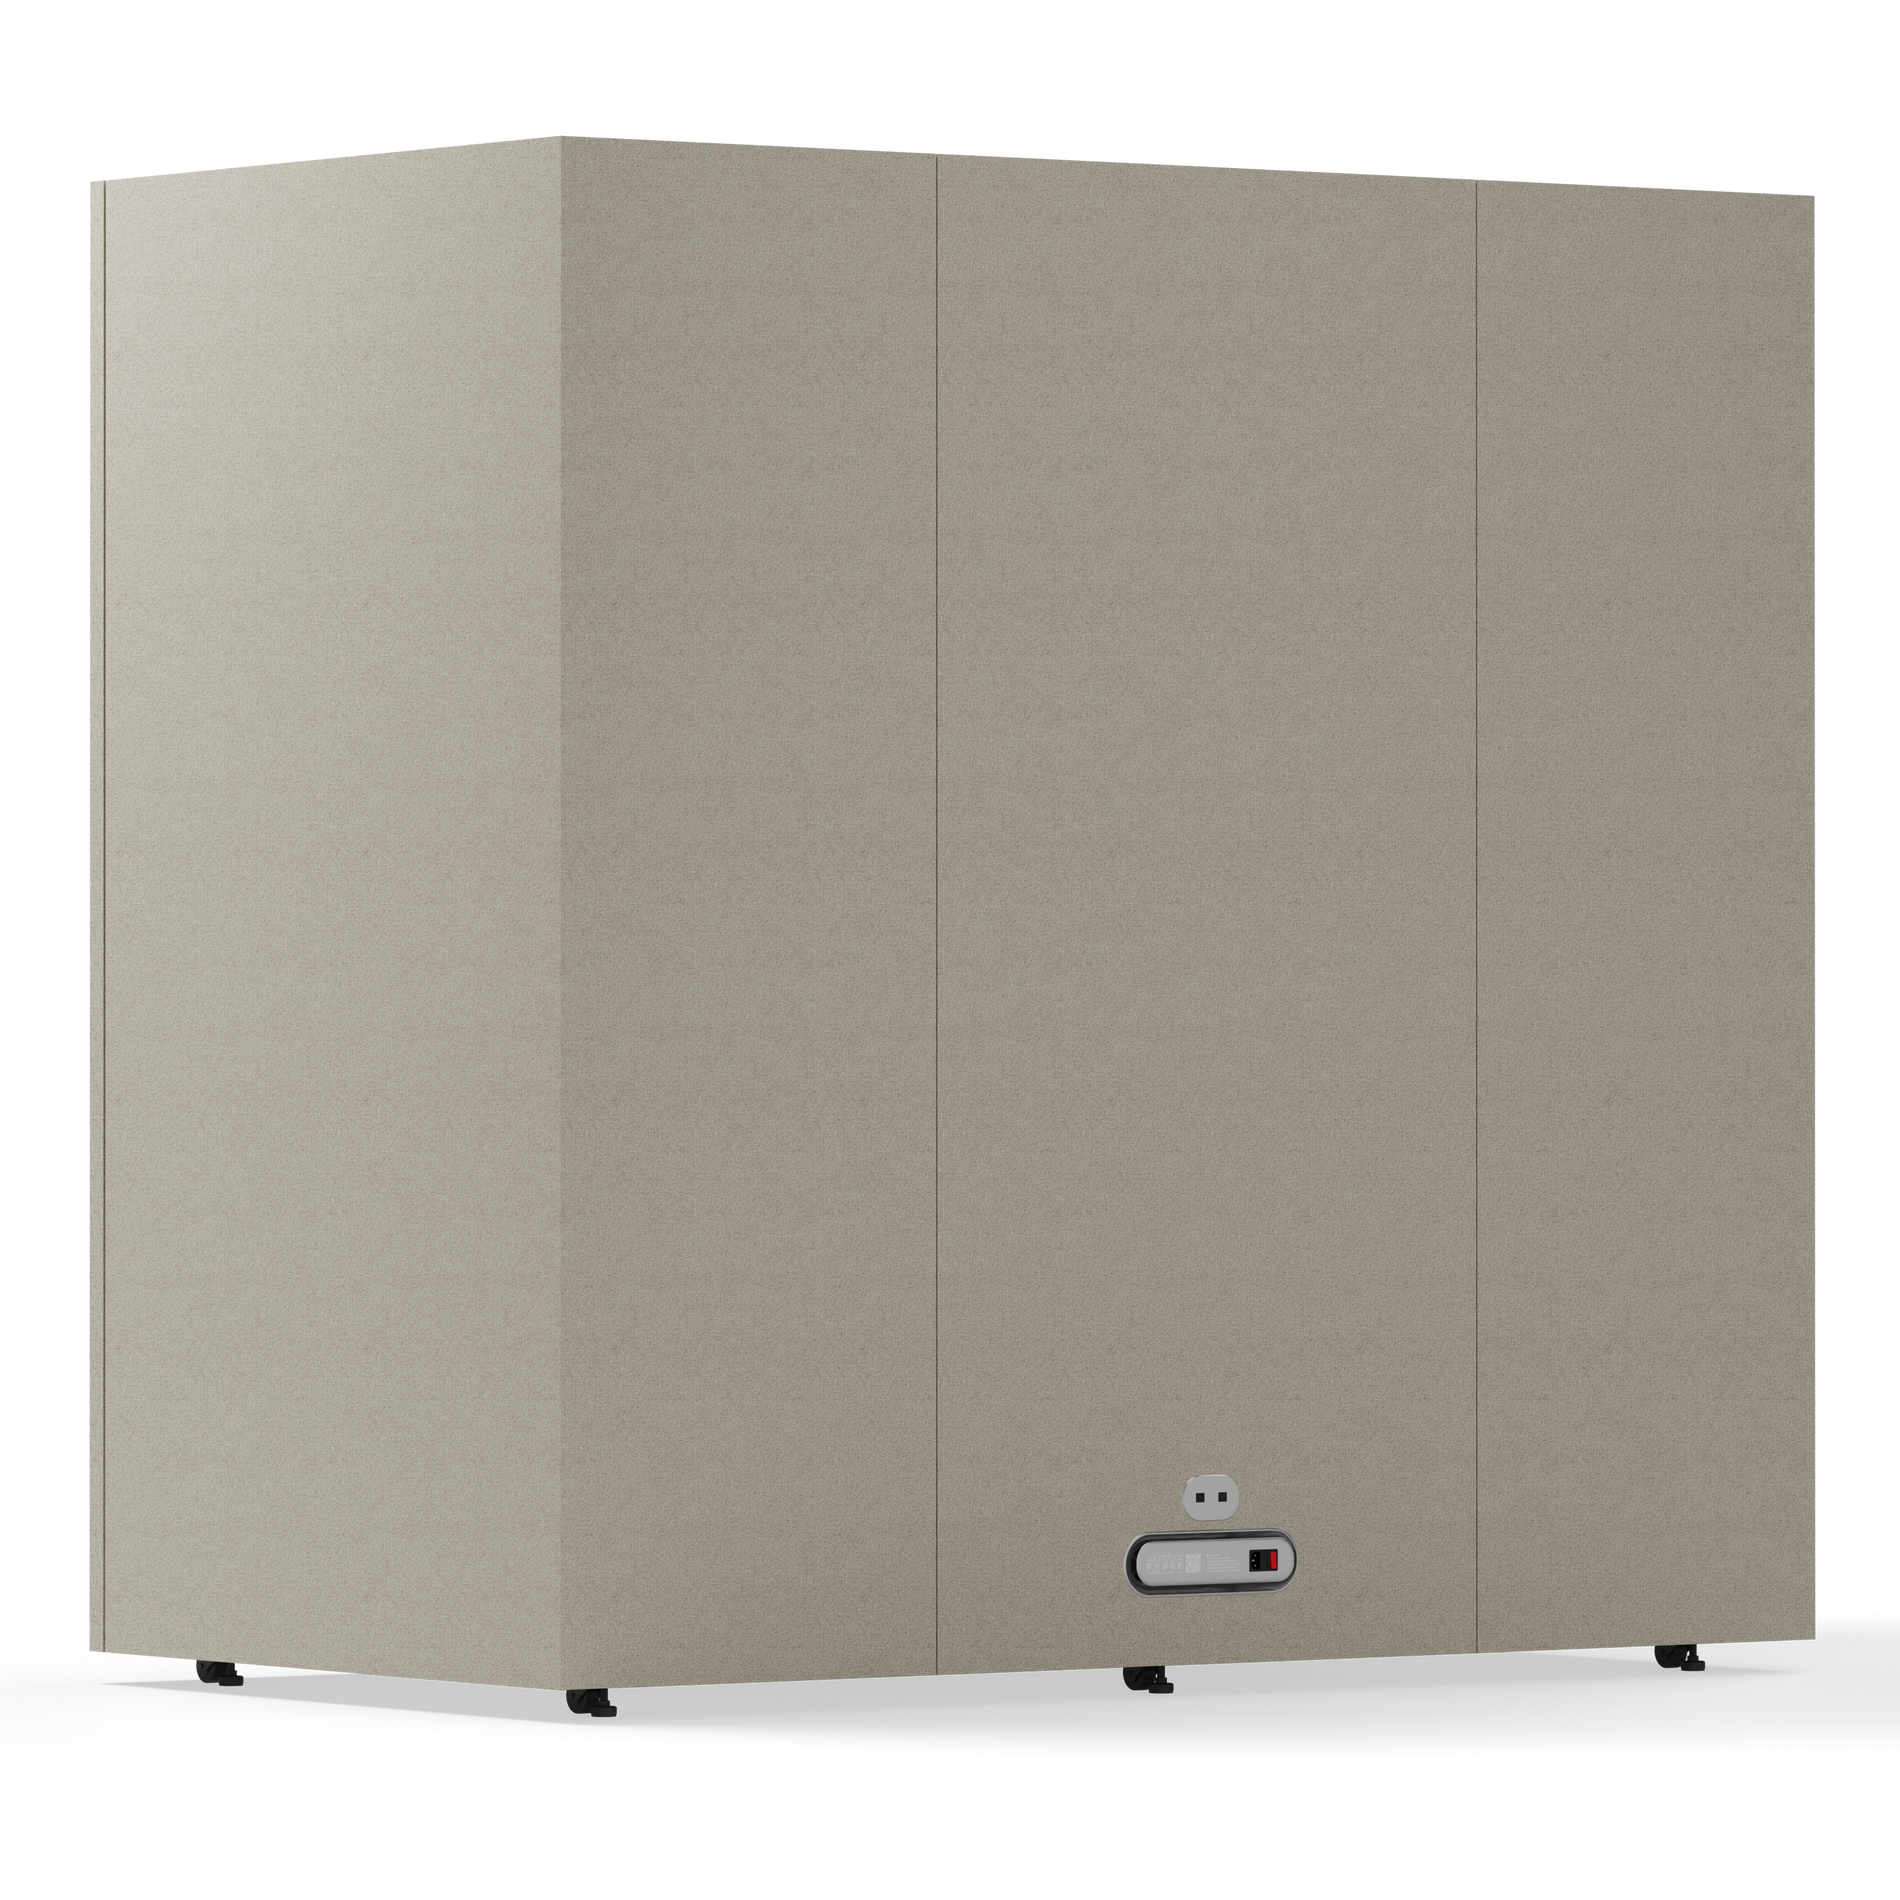 2 - 4 Person Meeting BoothFolio Beige / Furniture As Per Images